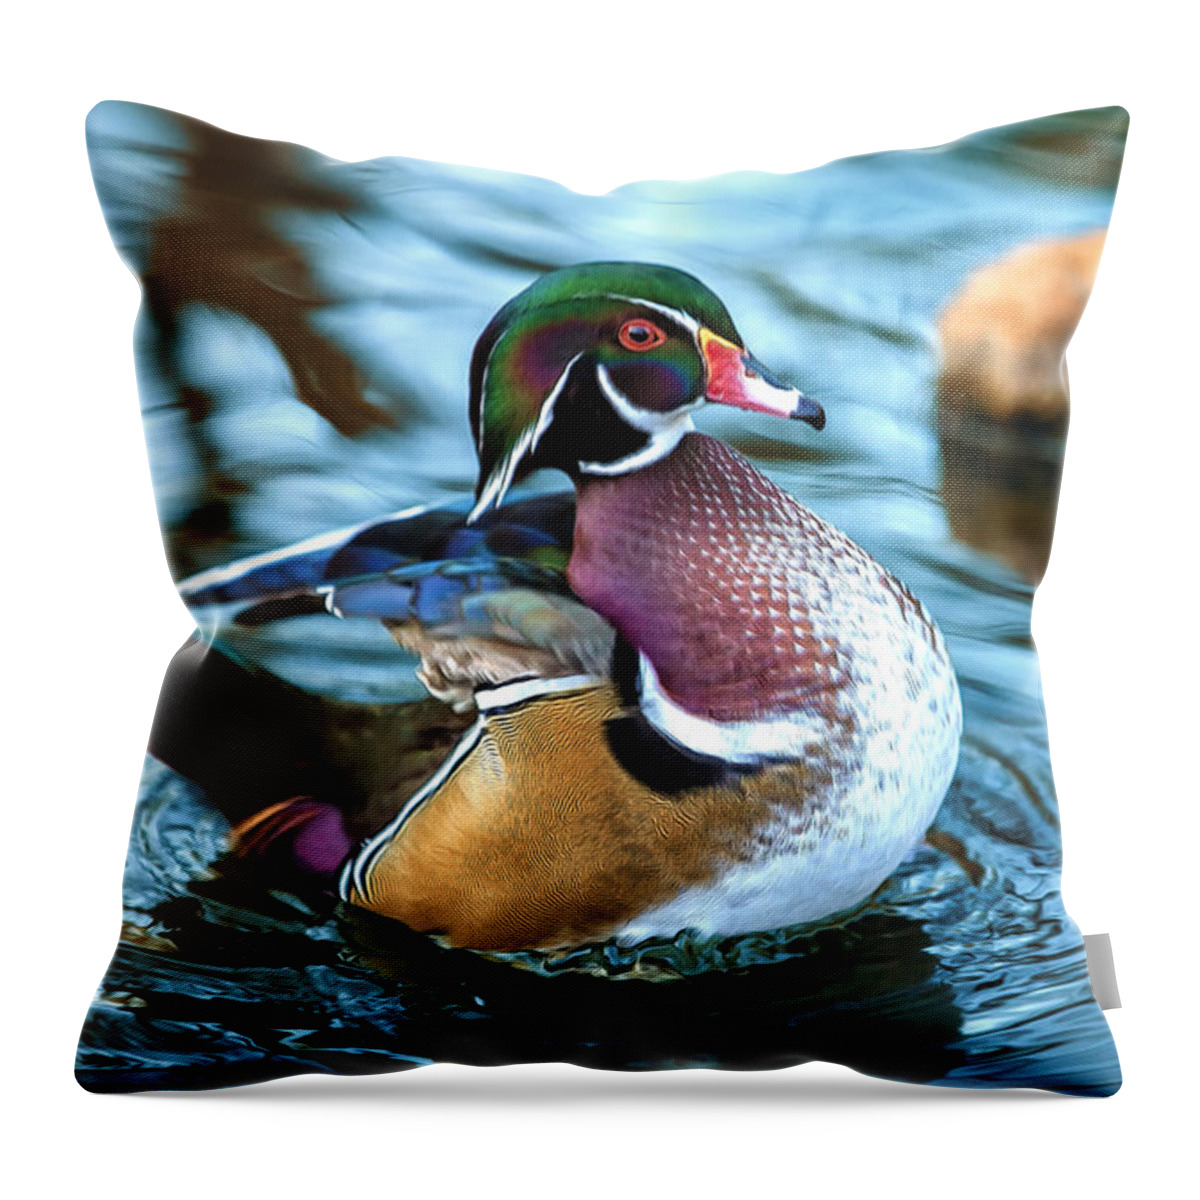 Wildlife Throw Pillow featuring the photograph Rocking Woody by Bill and Linda Tiepelman